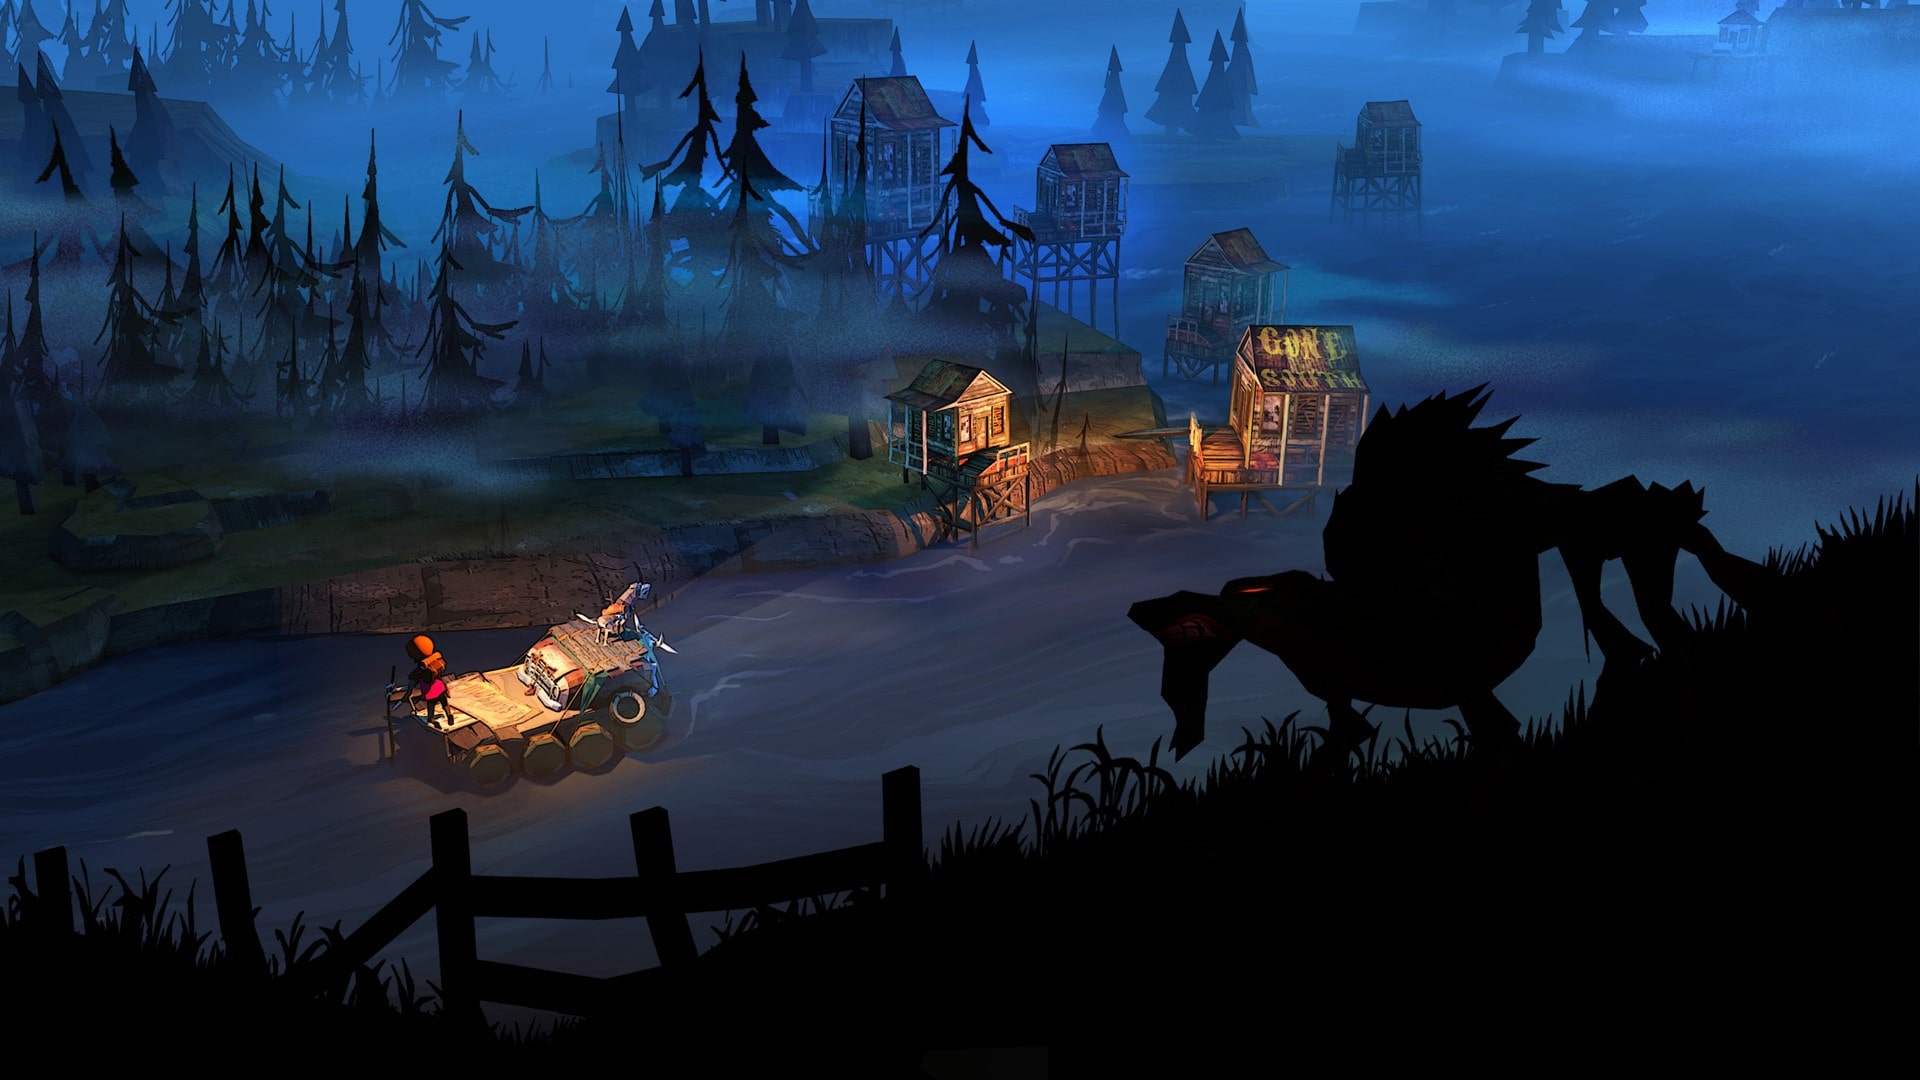 Крутой инди. The Flame in the Flood. Flame Flood игра. The Flame in the Flood арт. The Flame in the Flood арты.